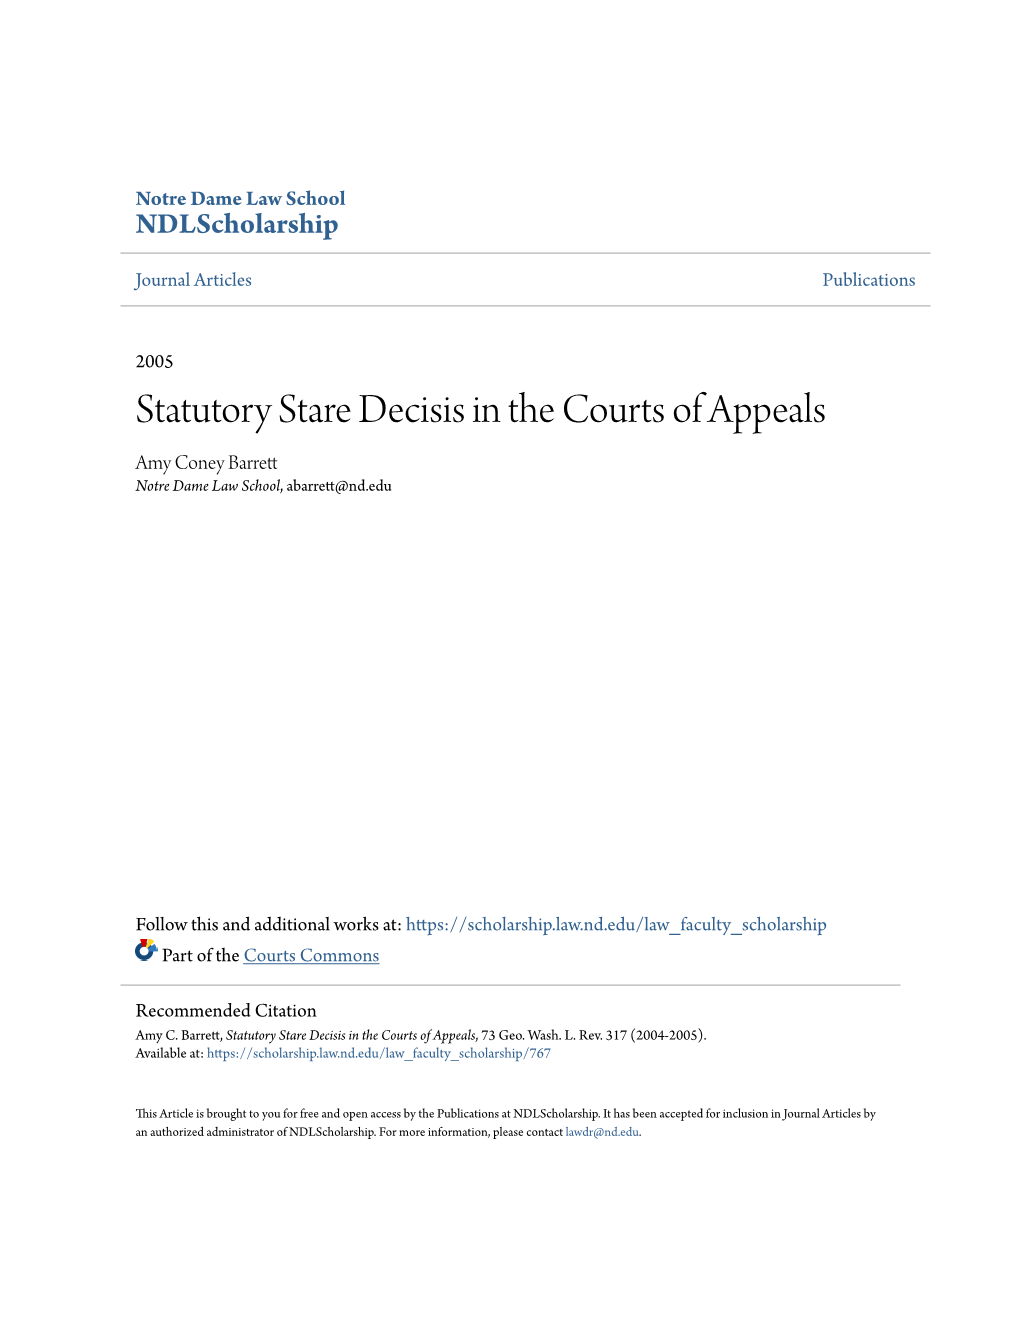 Statutory Stare Decisis in the Courts of Appeals Amy Coney Barrett Notre Dame Law School, Abarrett@Nd.Edu